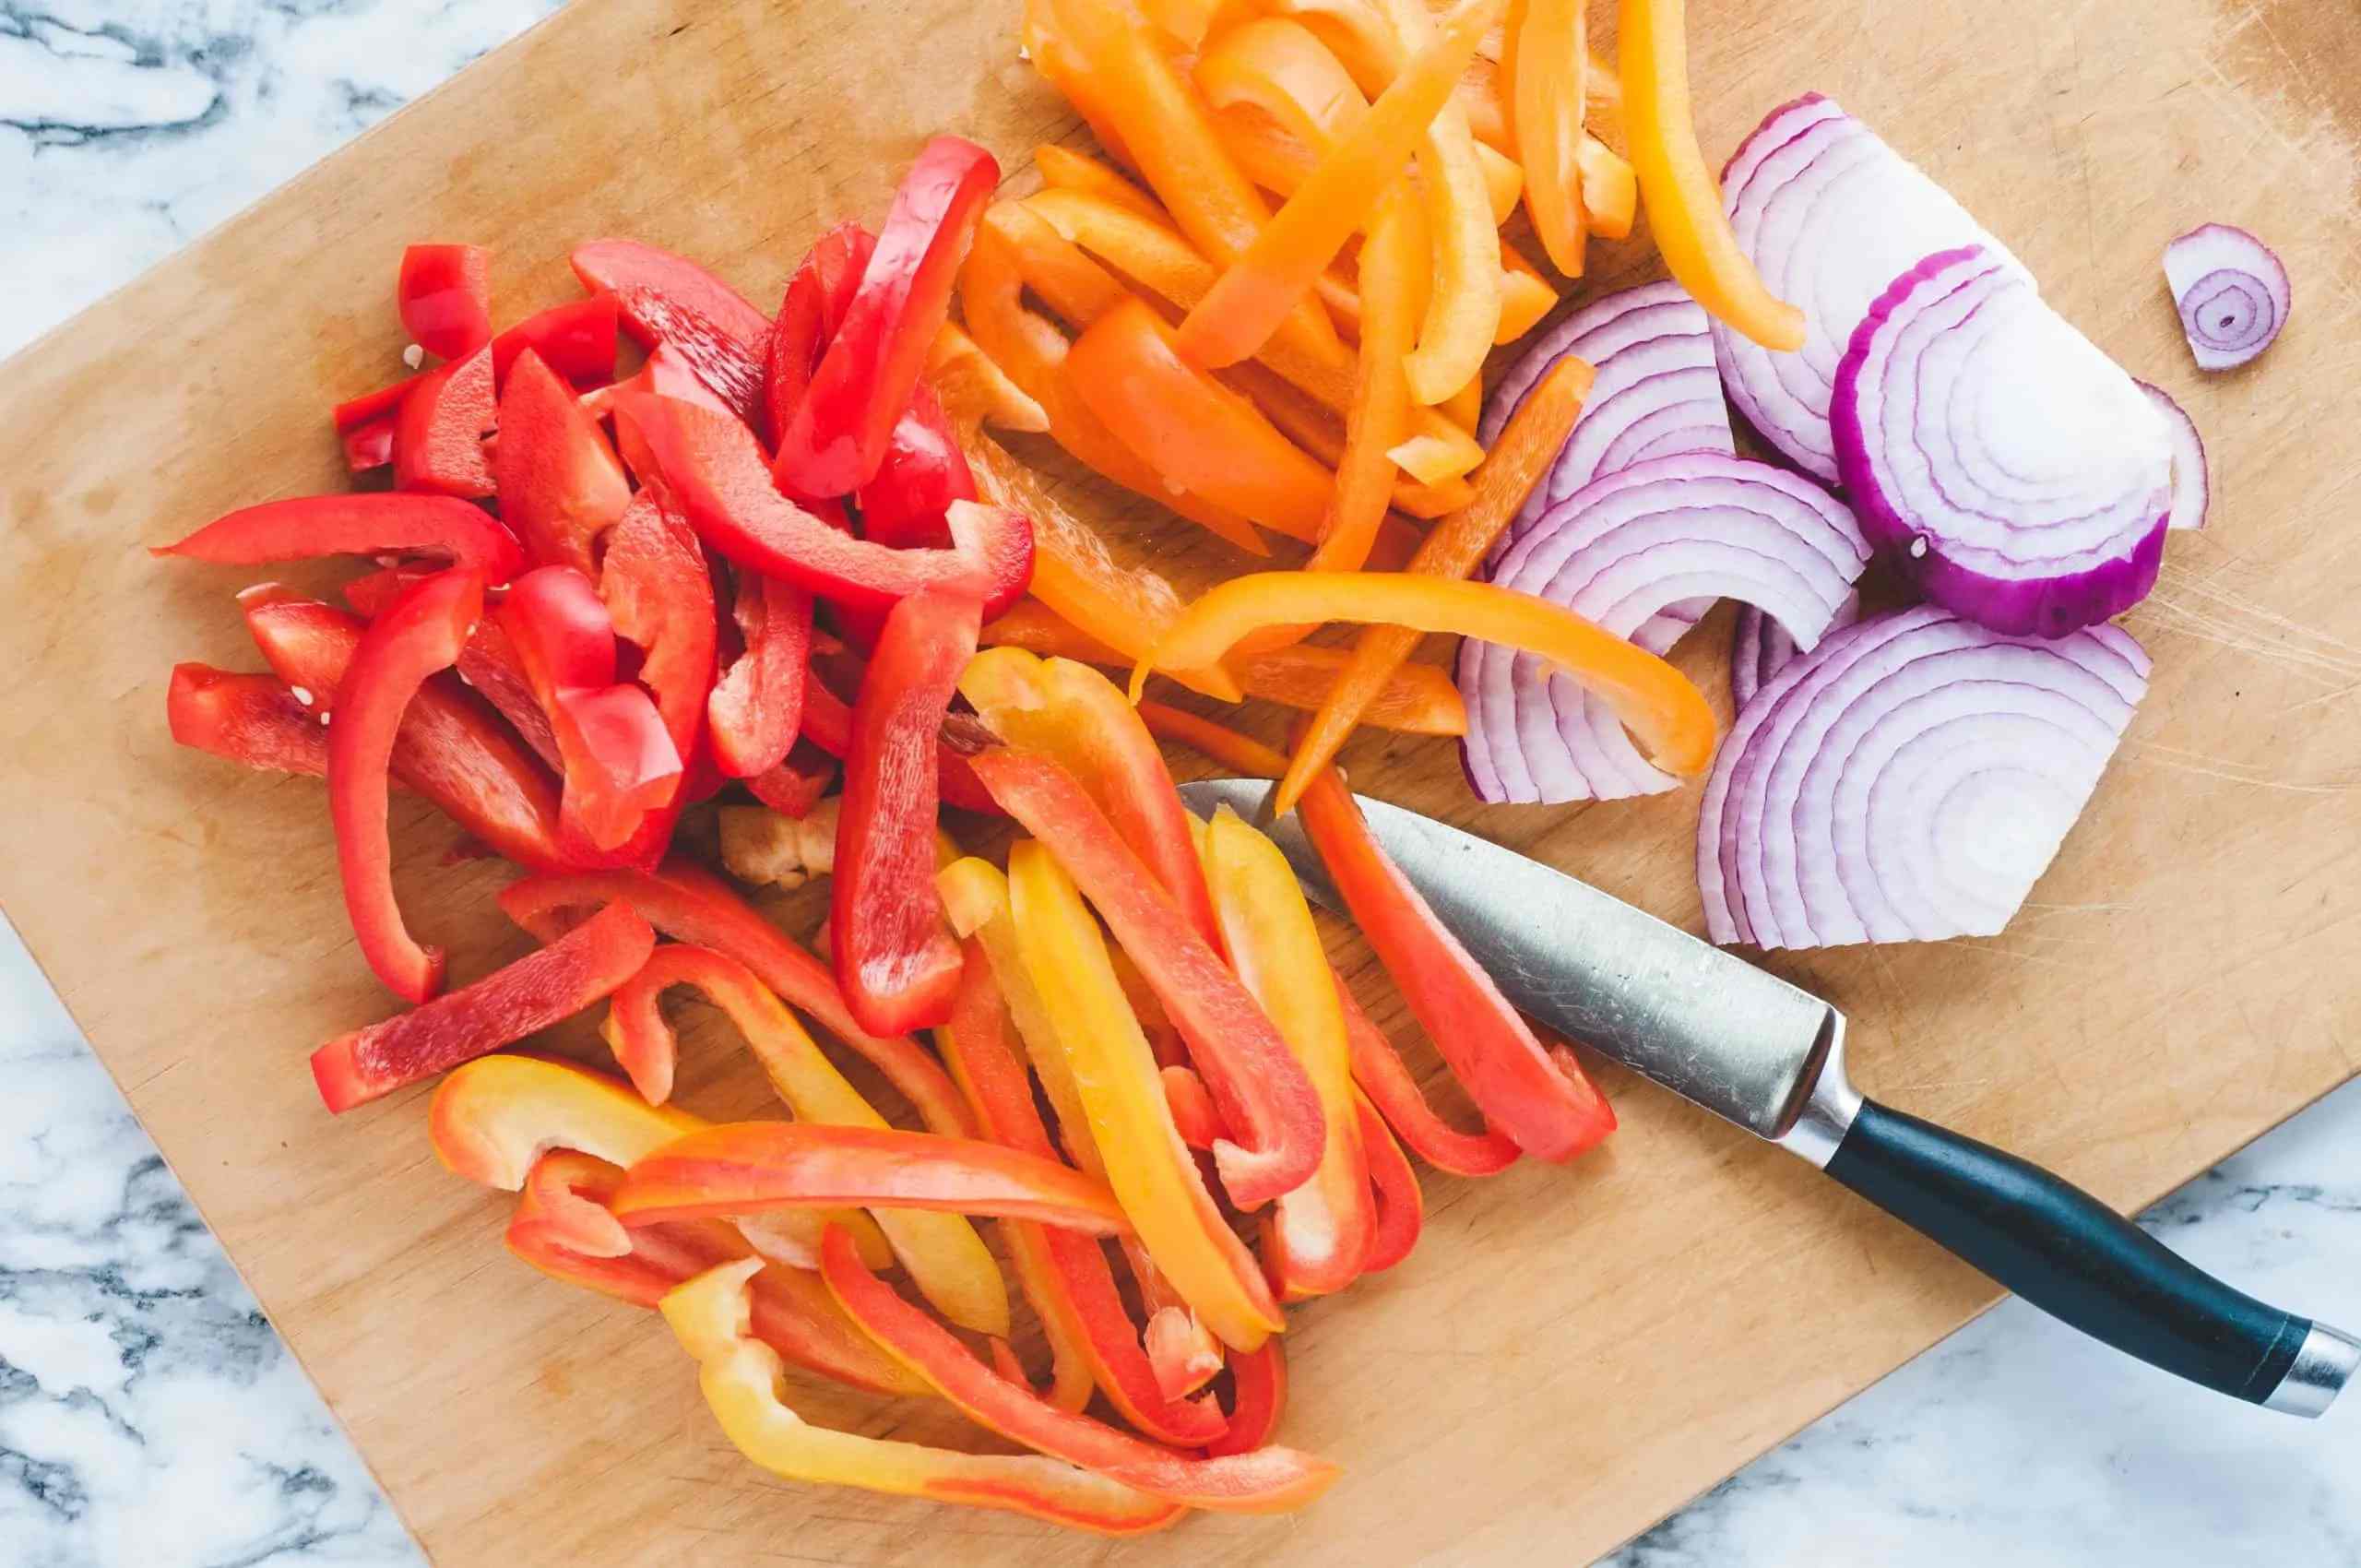 Onions & Peppers